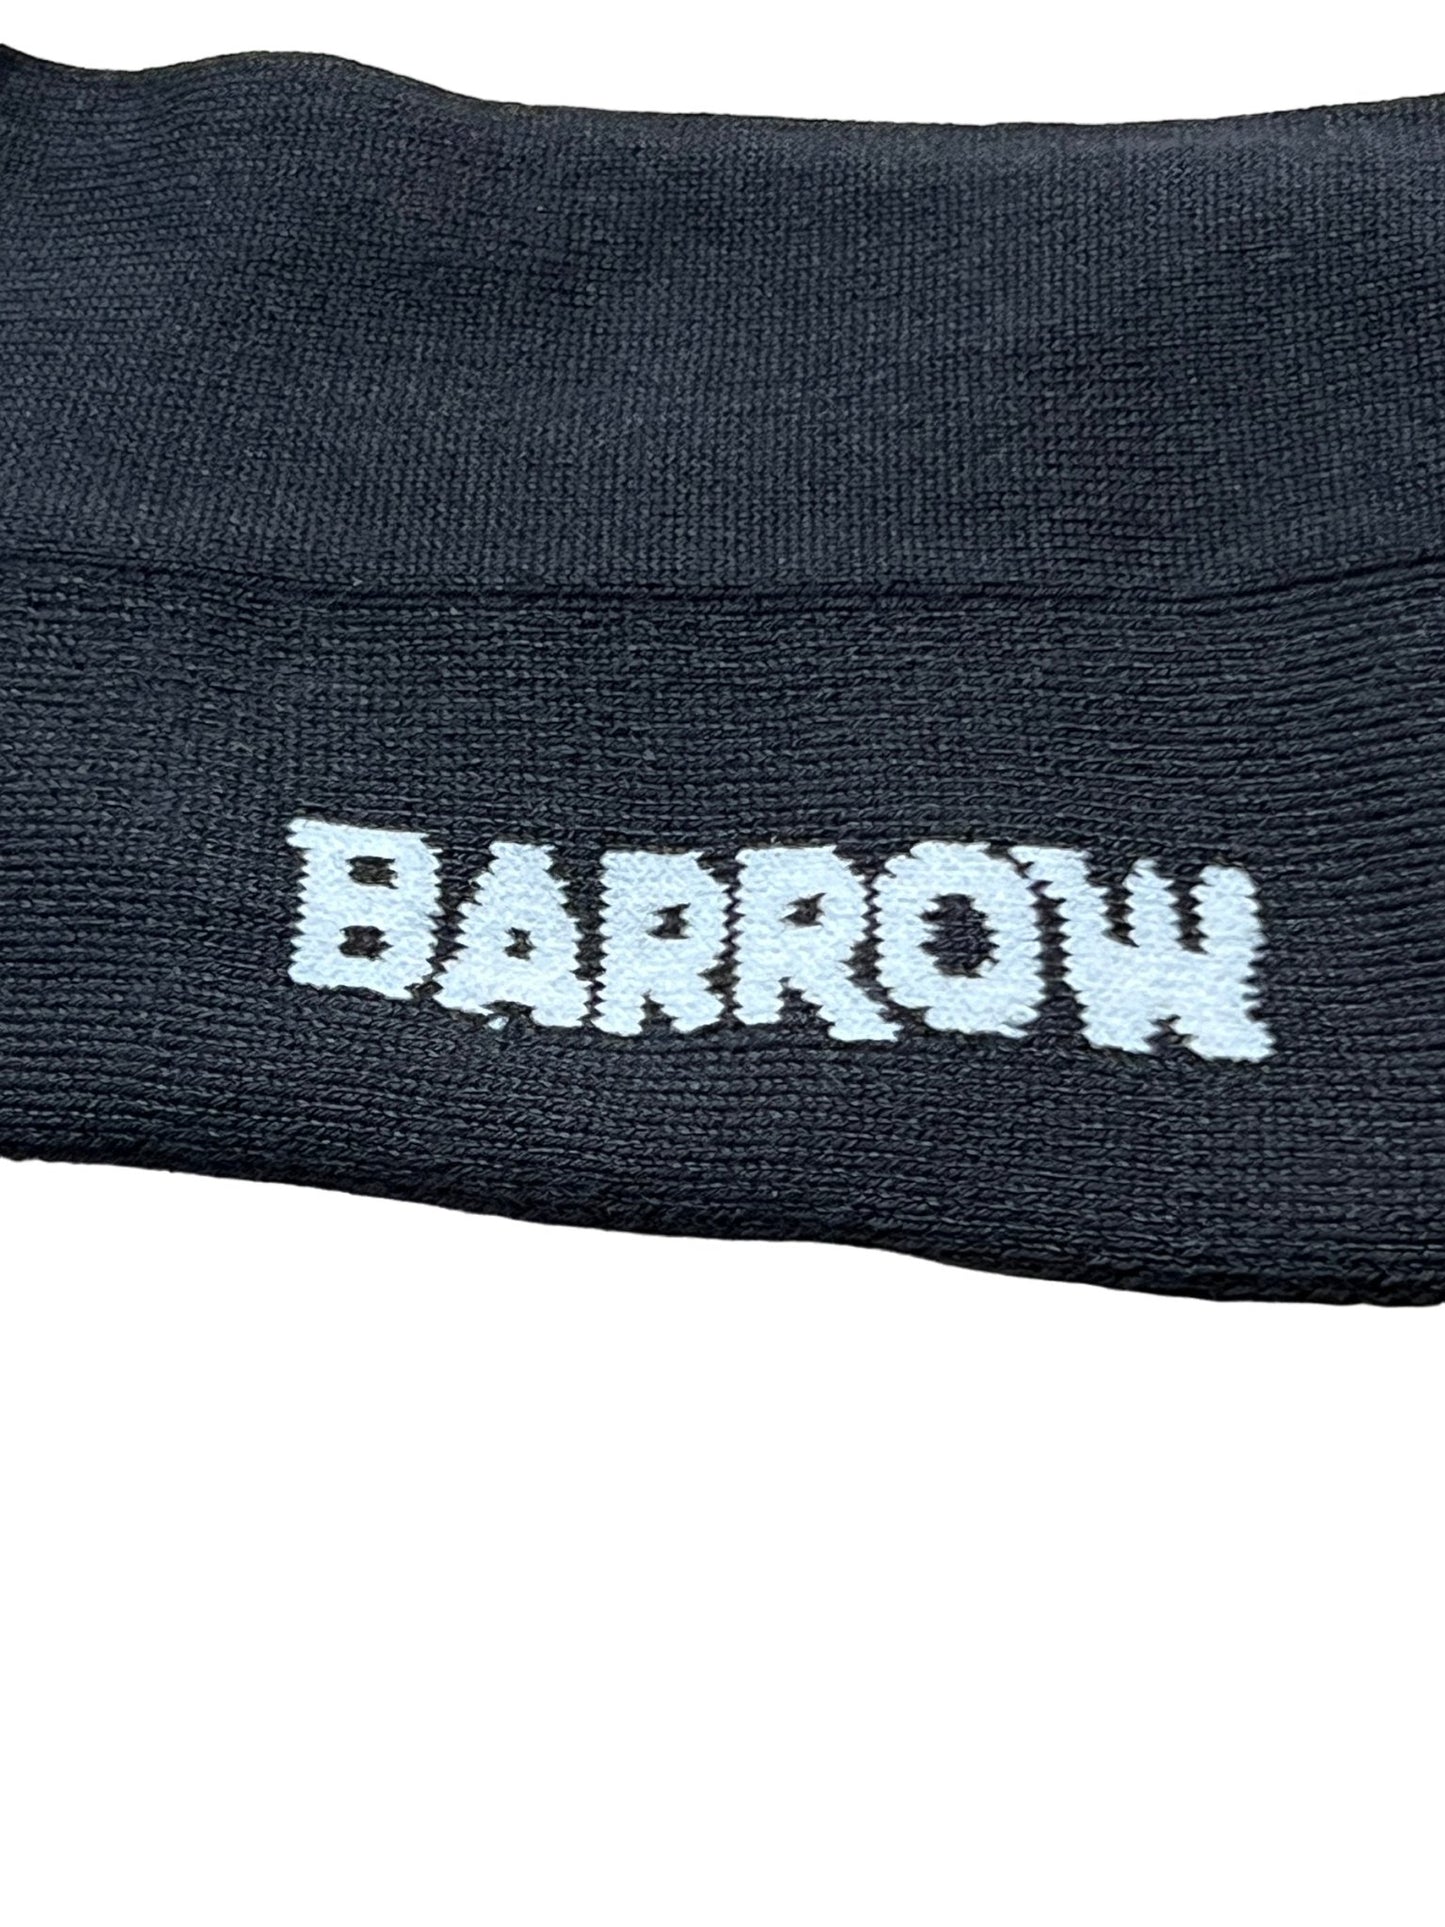 Close-up of a black fabric with the word "BARROW" embroidered in white thread on BARROW S4BWUASO140 SOCKS UNISEX.